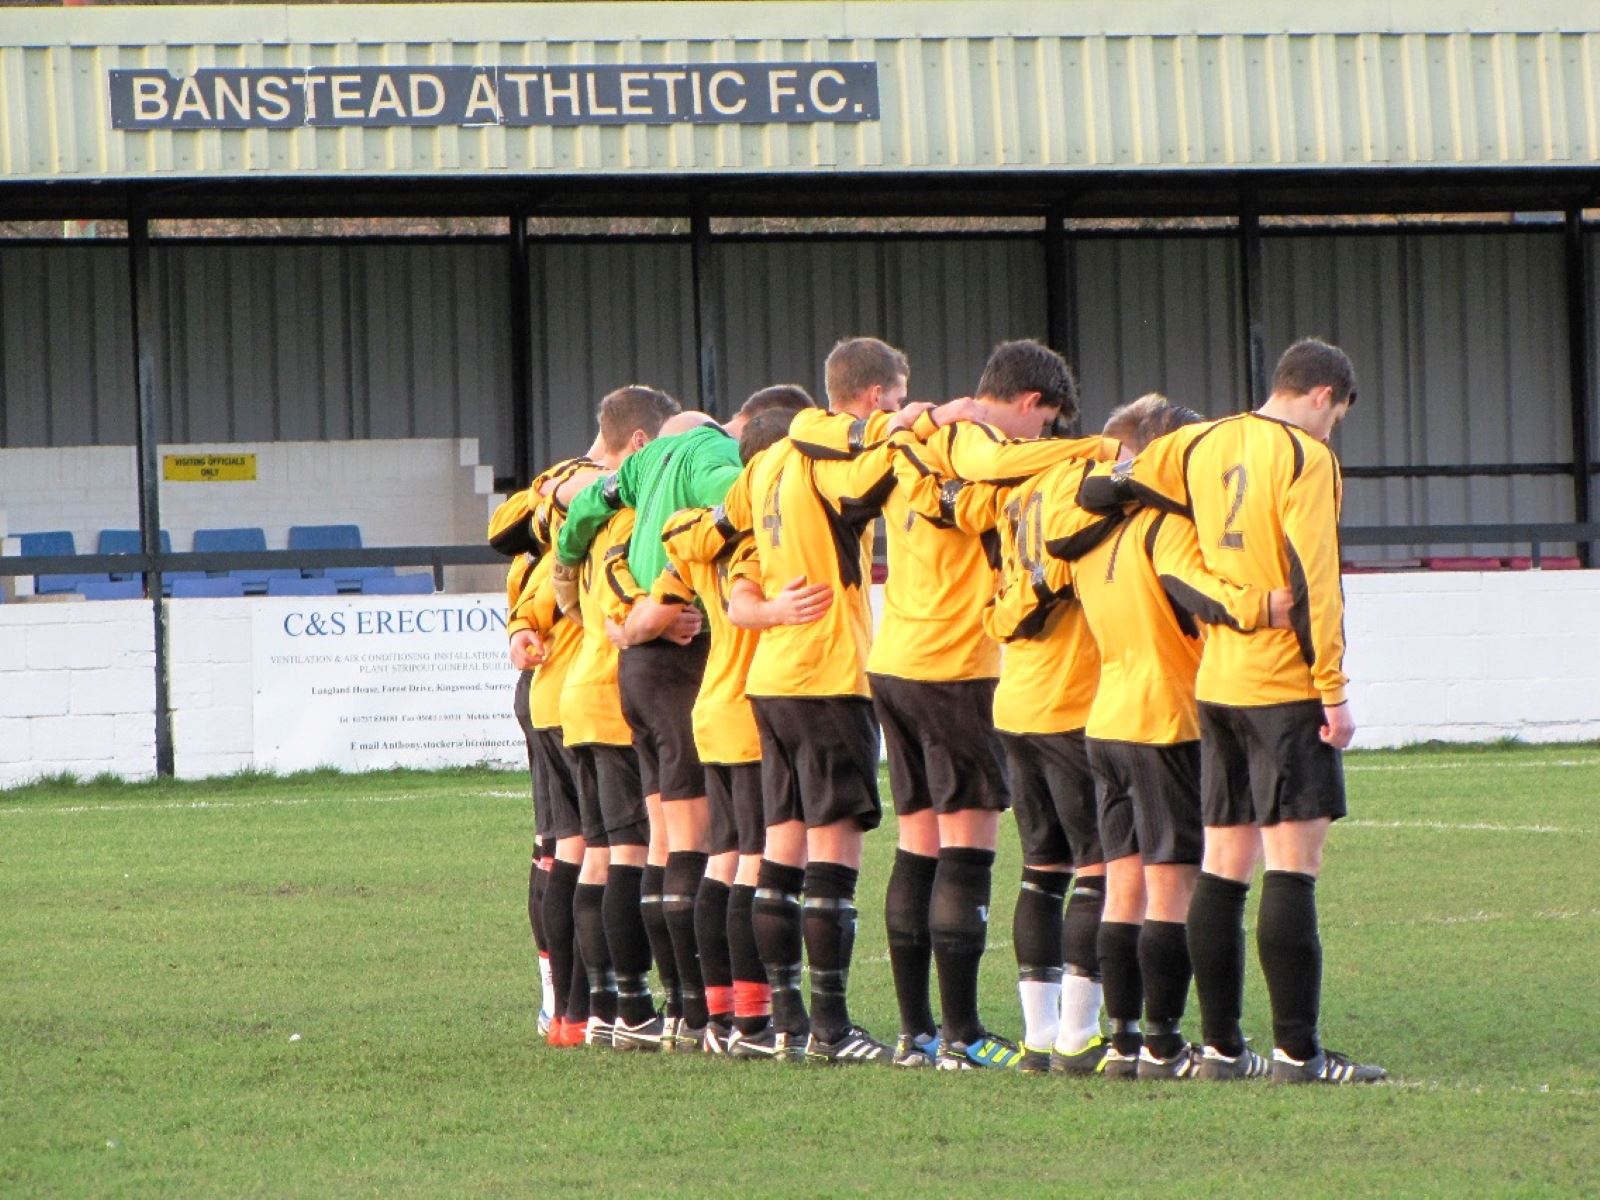 banstead-athletic-fc-11-football-club-facts